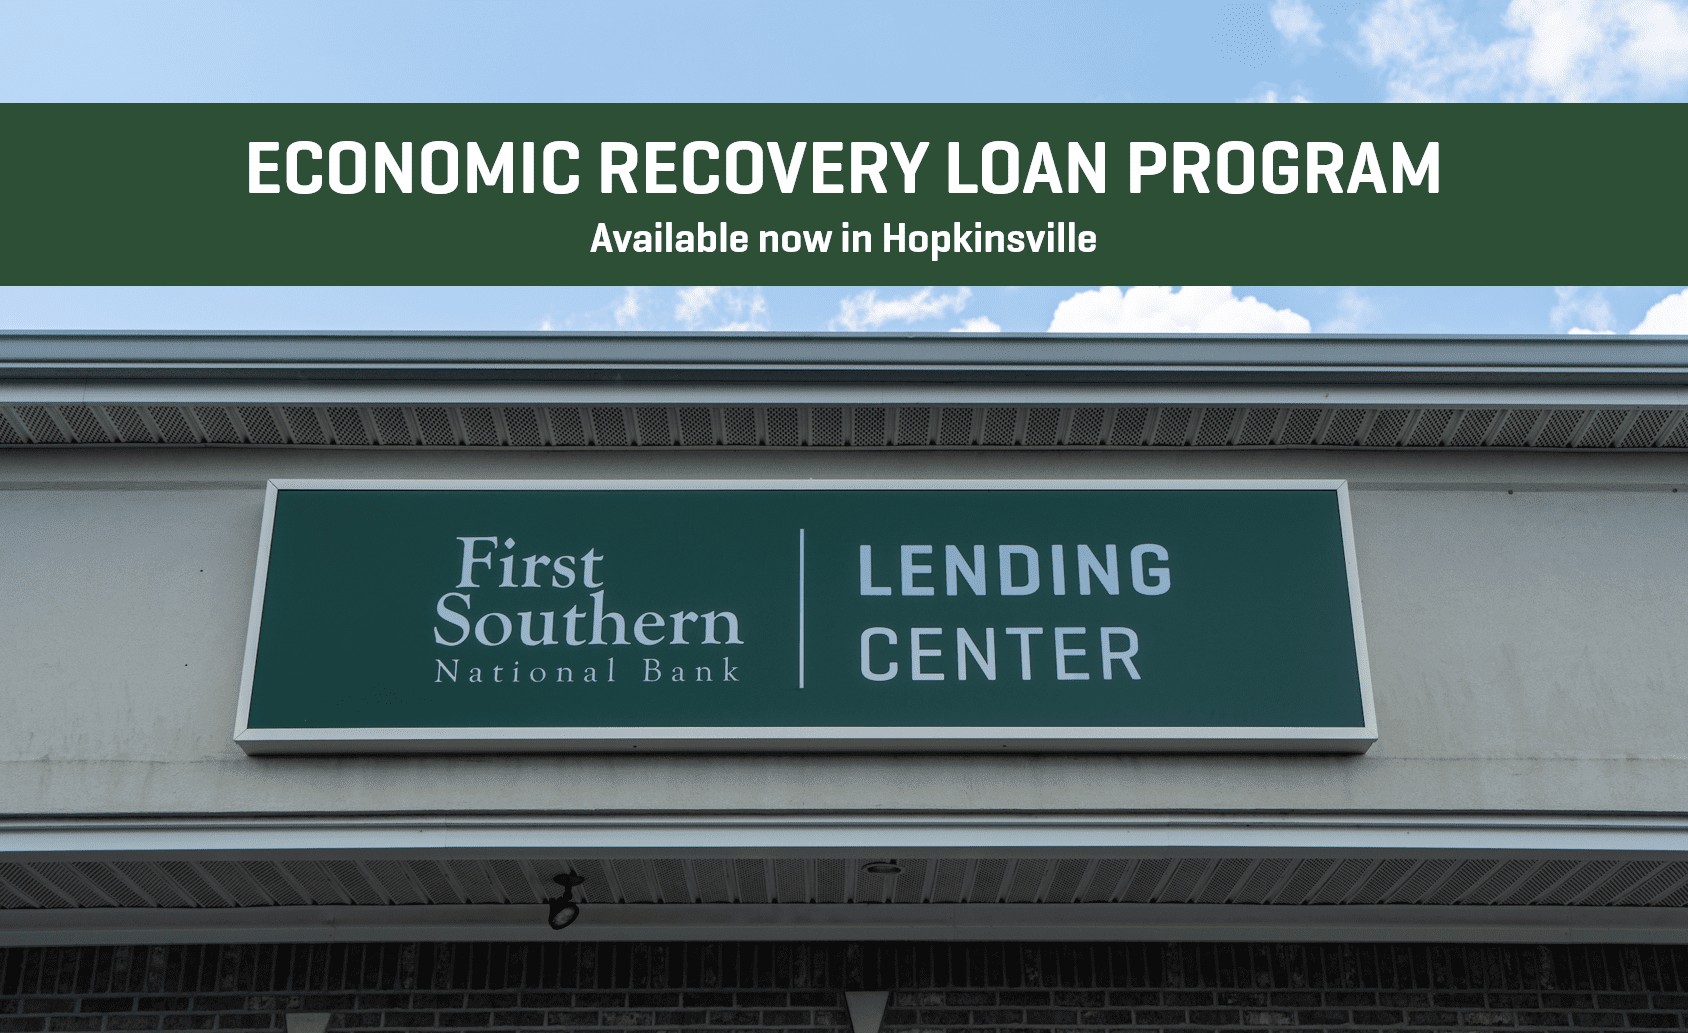 Lending Center sign for First Southern National Bank